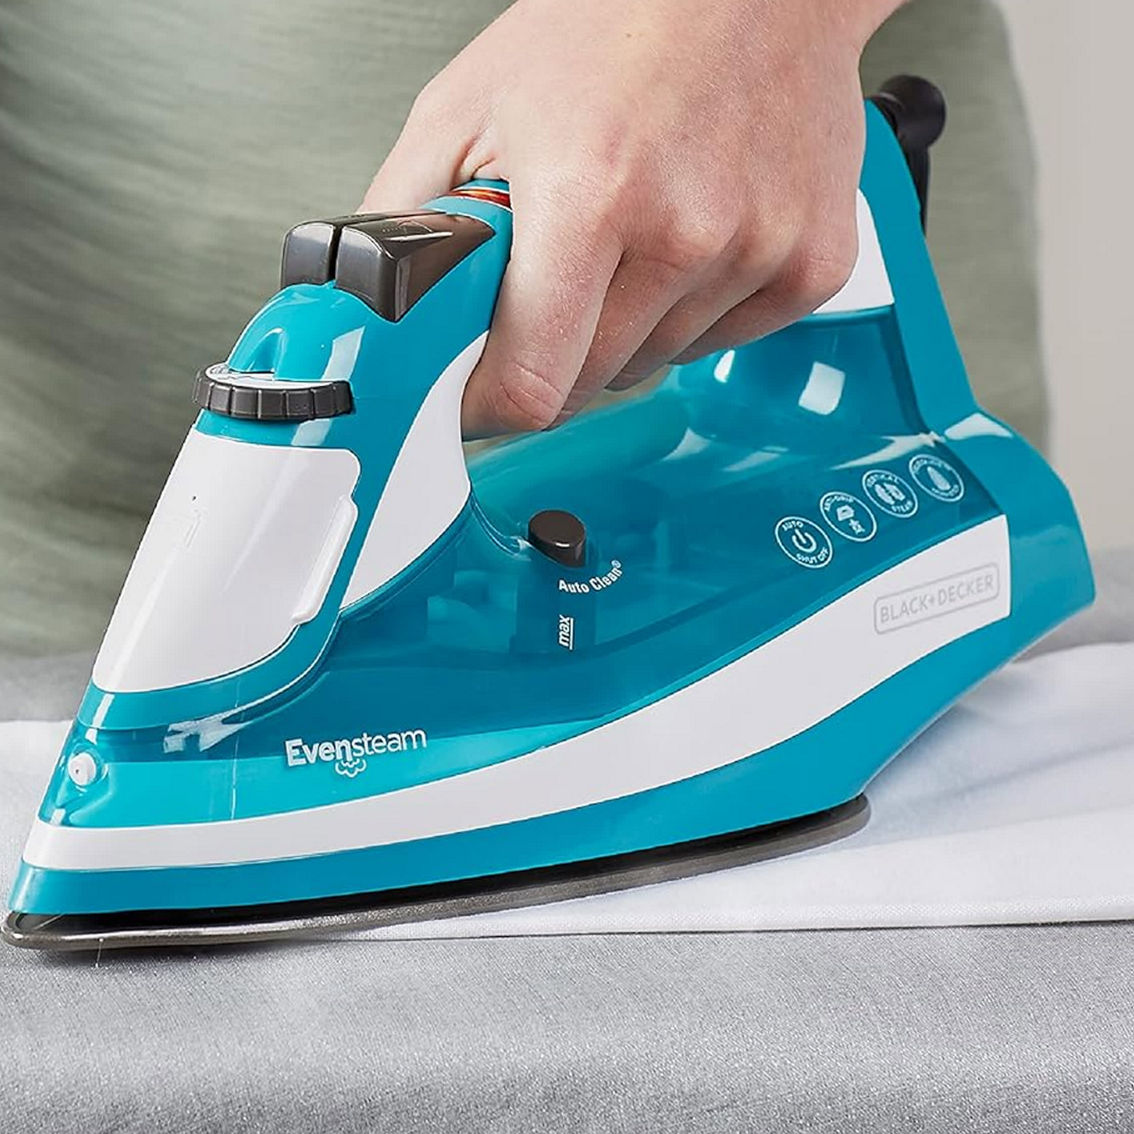 Black+Decker One Step Steam Iron in Turquoise - Image 4 of 4